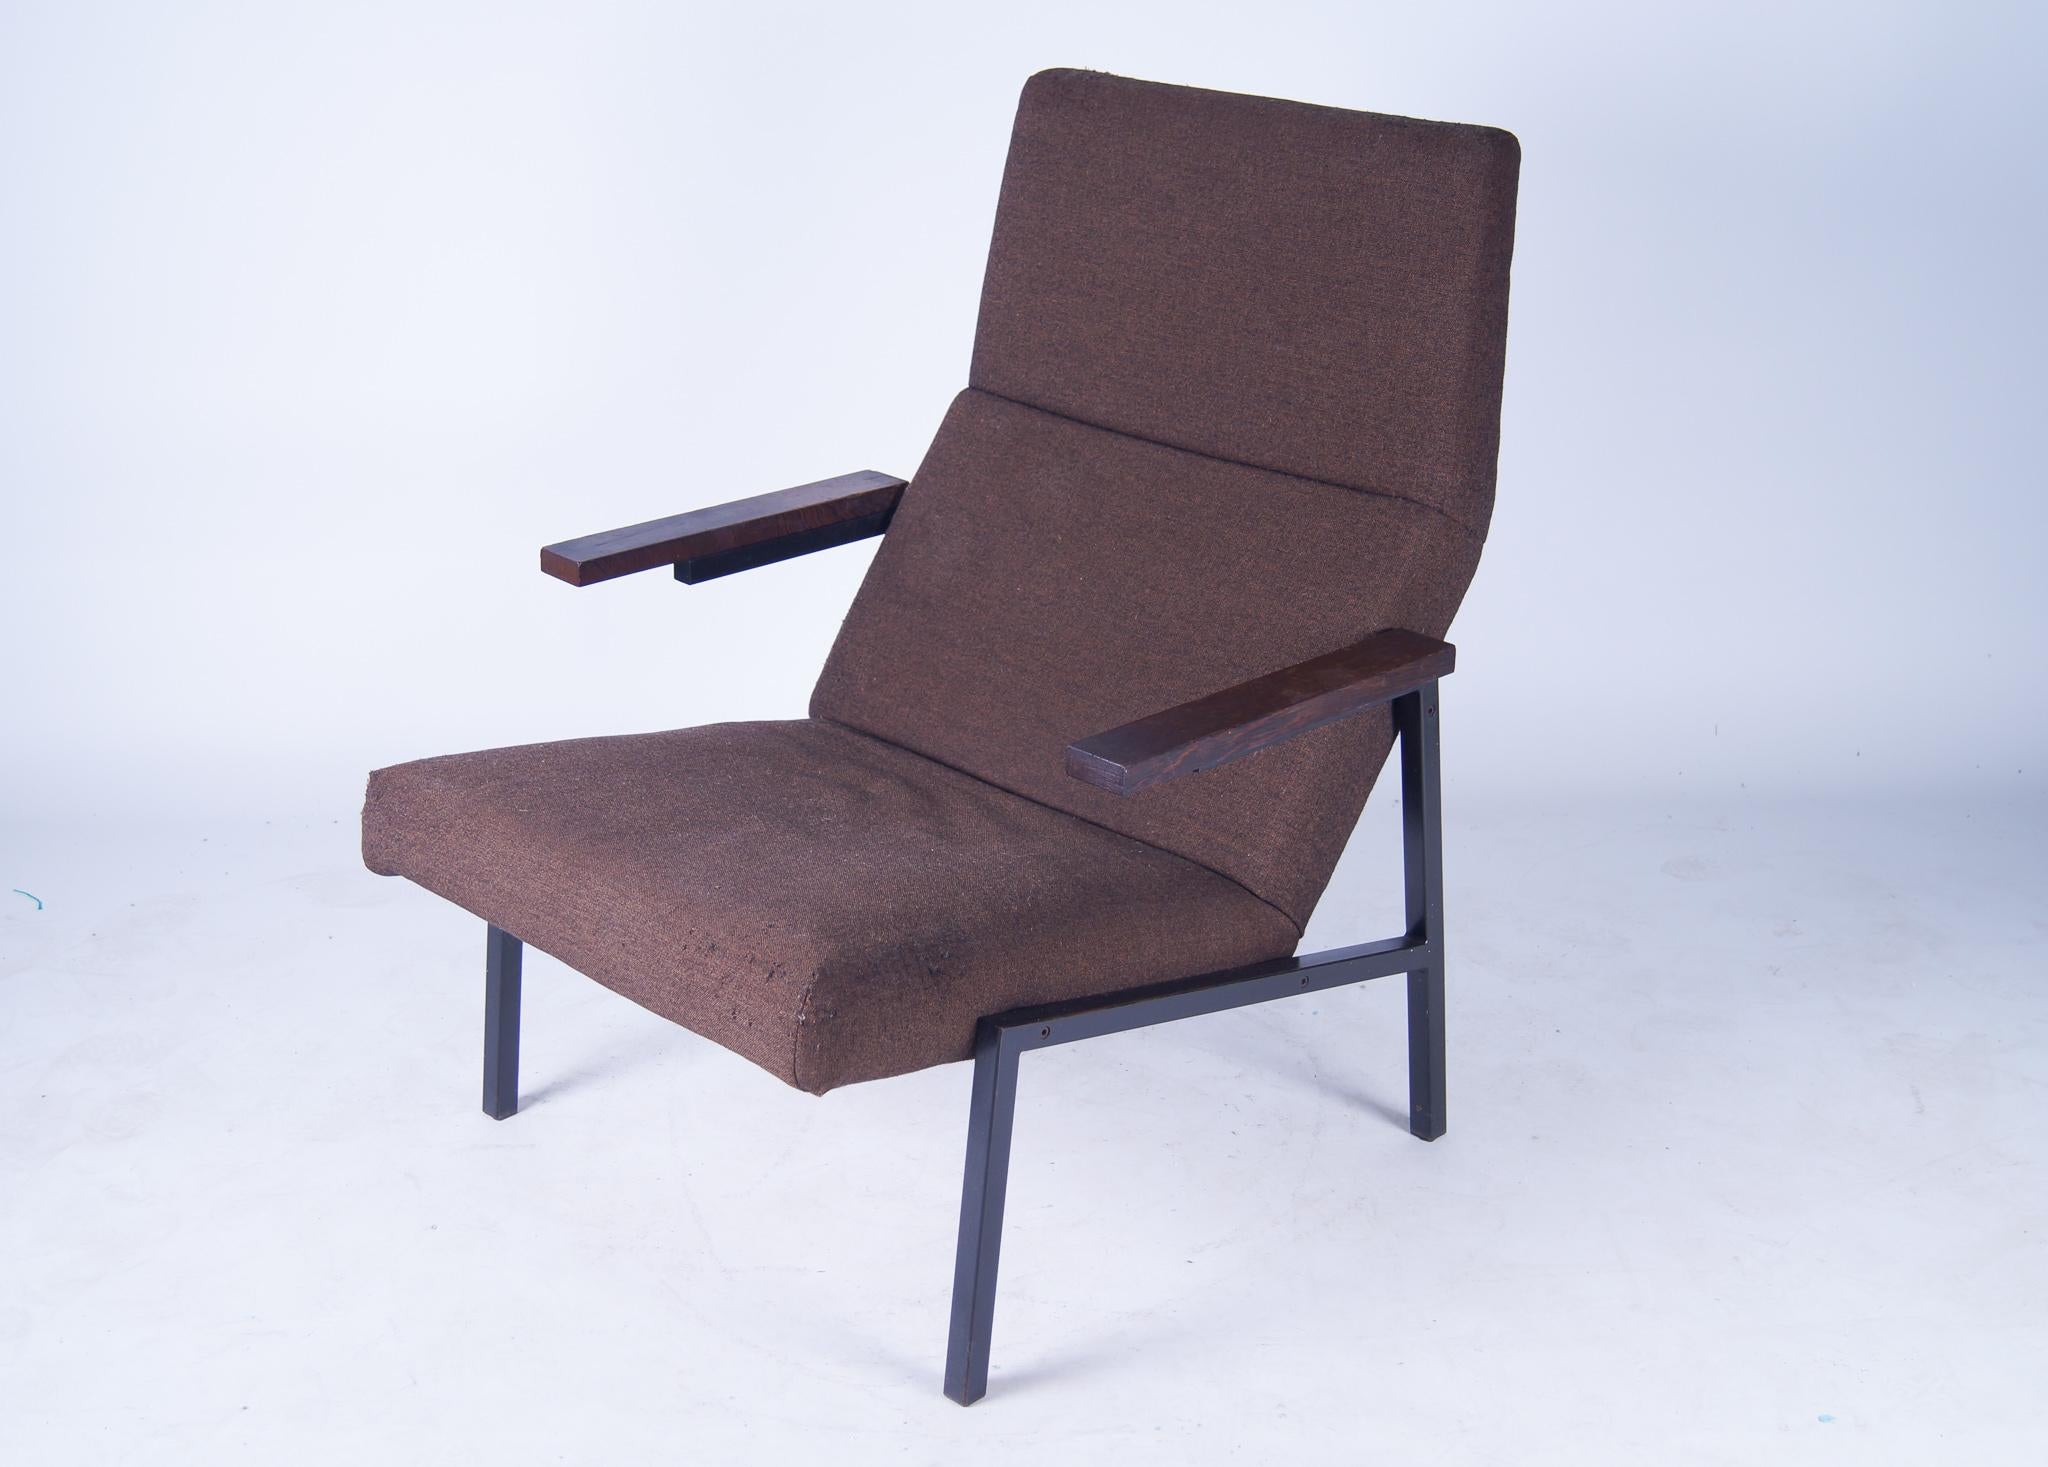 Martin Visser for Spectrum SZ 67 lounge chair with a Metal Frame, Wenge Arm Rests, In original Upholsterey in brown 'van der Ploeg' wool. In all original condition with some Wear Consistent with Age and Use. There are user marks on the wool as